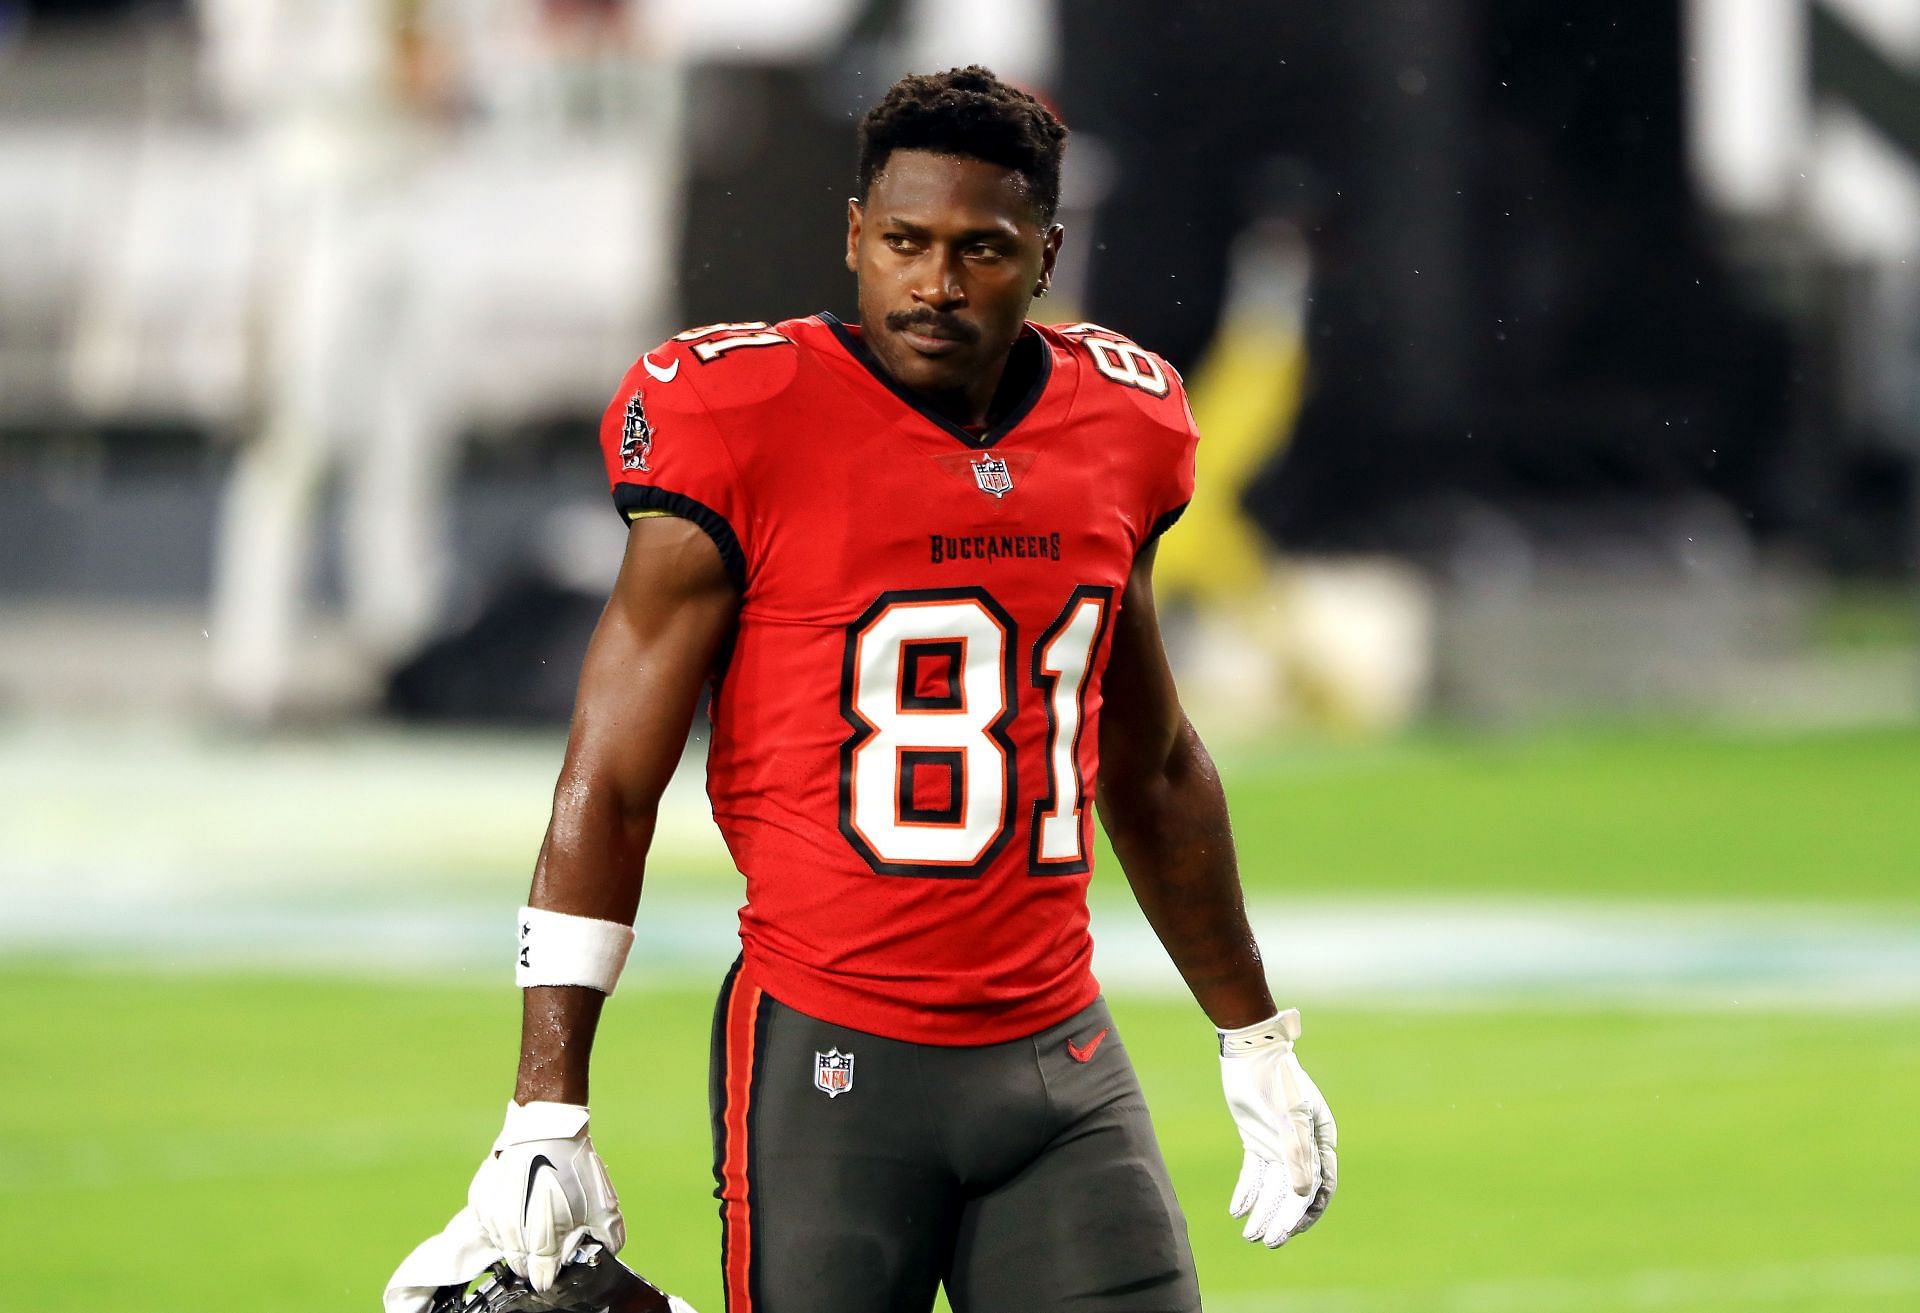 WATCH: Ex-NFL player Antonio Brown flashes his P**** at a woman in